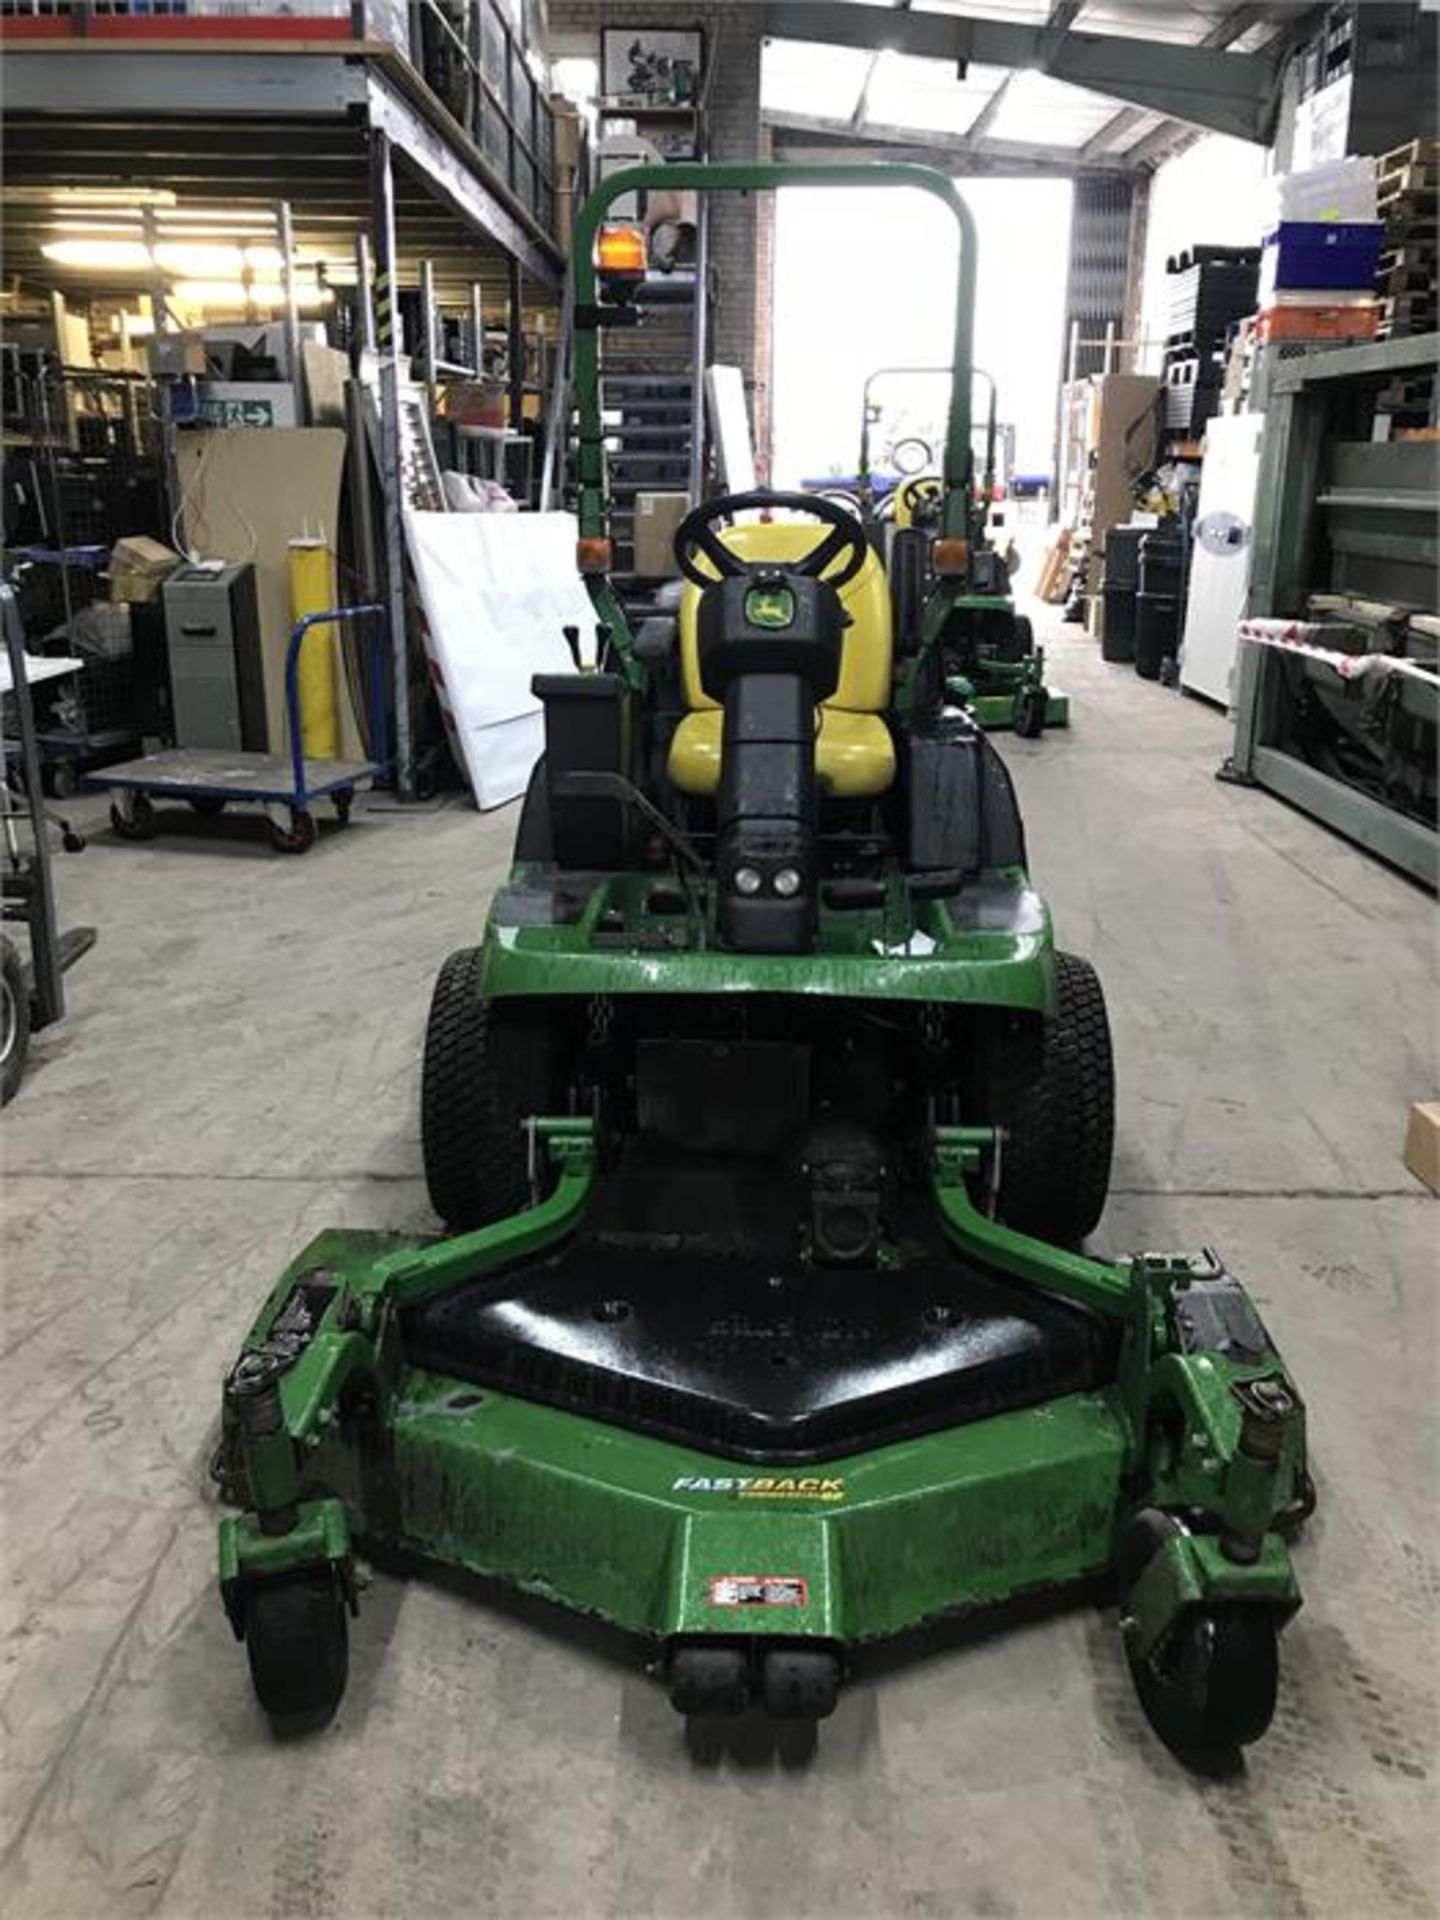 John Deere 1570 TER C 4WD Front Rotary Mower with Fastback Commercial 62 Attachment - Image 2 of 6